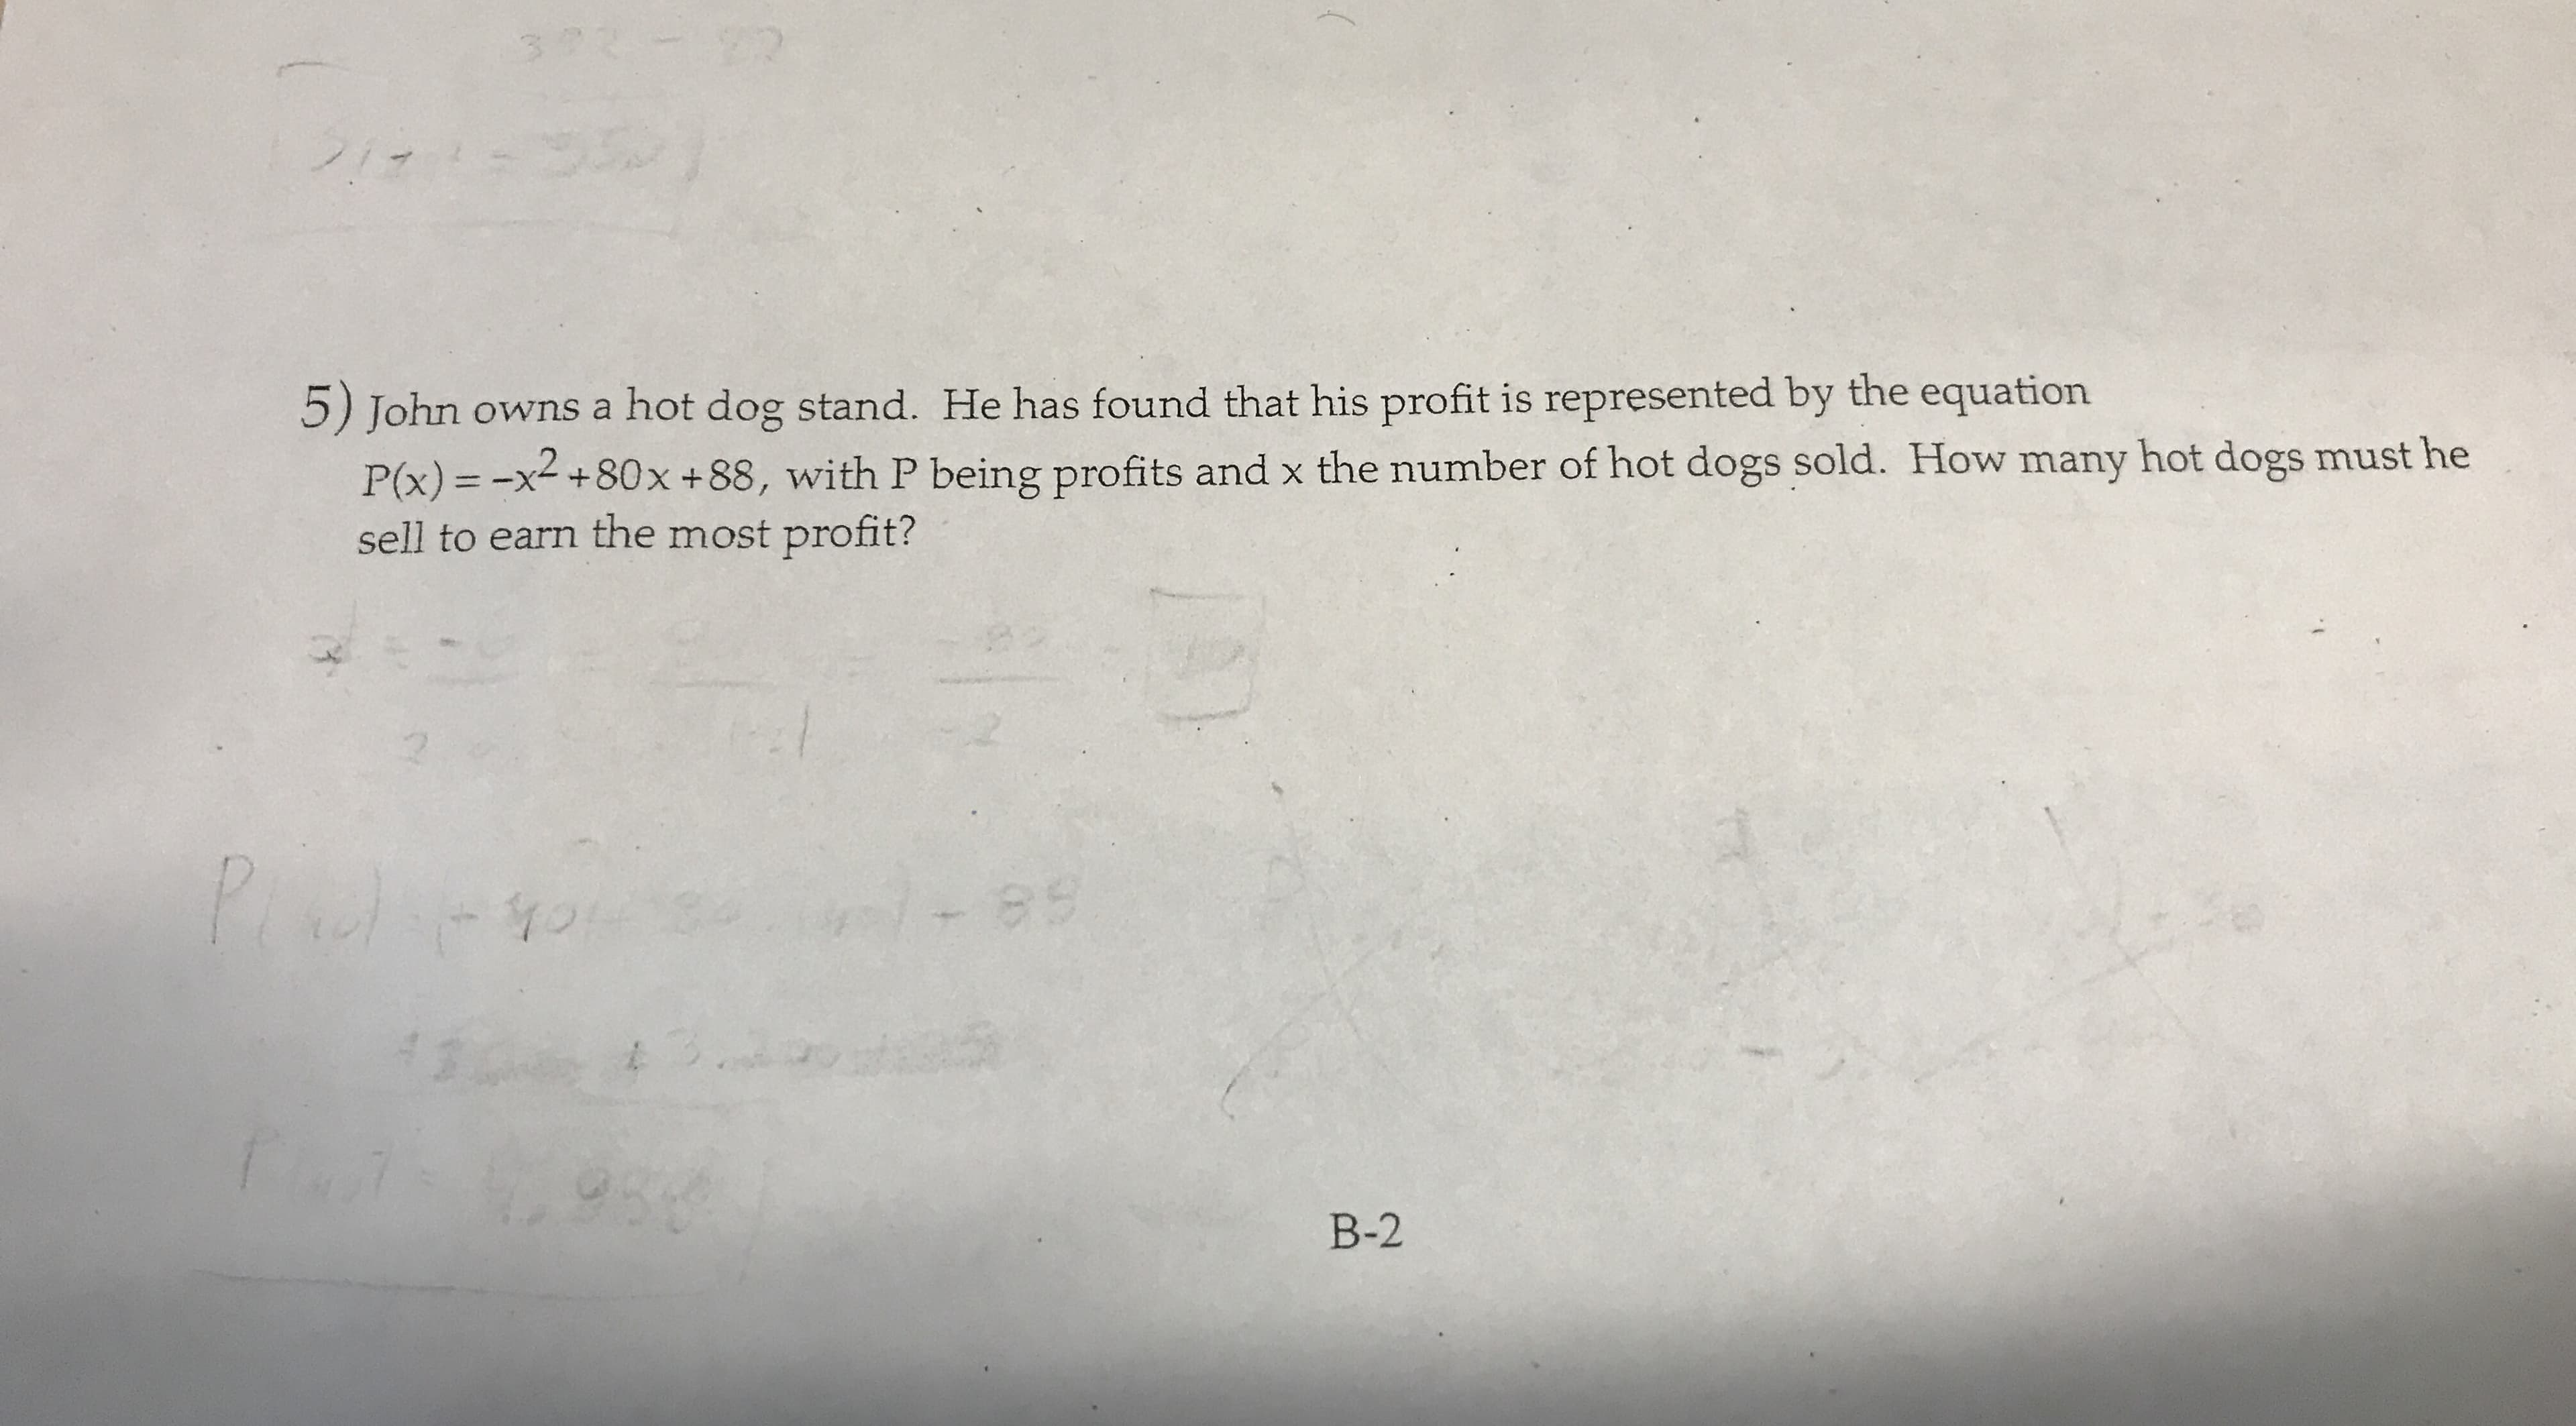 22
372
20n
5) John owns a hot dog stand. He has found that his profit is represented by the equation
P(x)=-x+80x + 88, with P being profits and x the number of hot dogs sold. How many hot dogs must he
sell to earn the most profit?
es
3
954
B-2
0S
